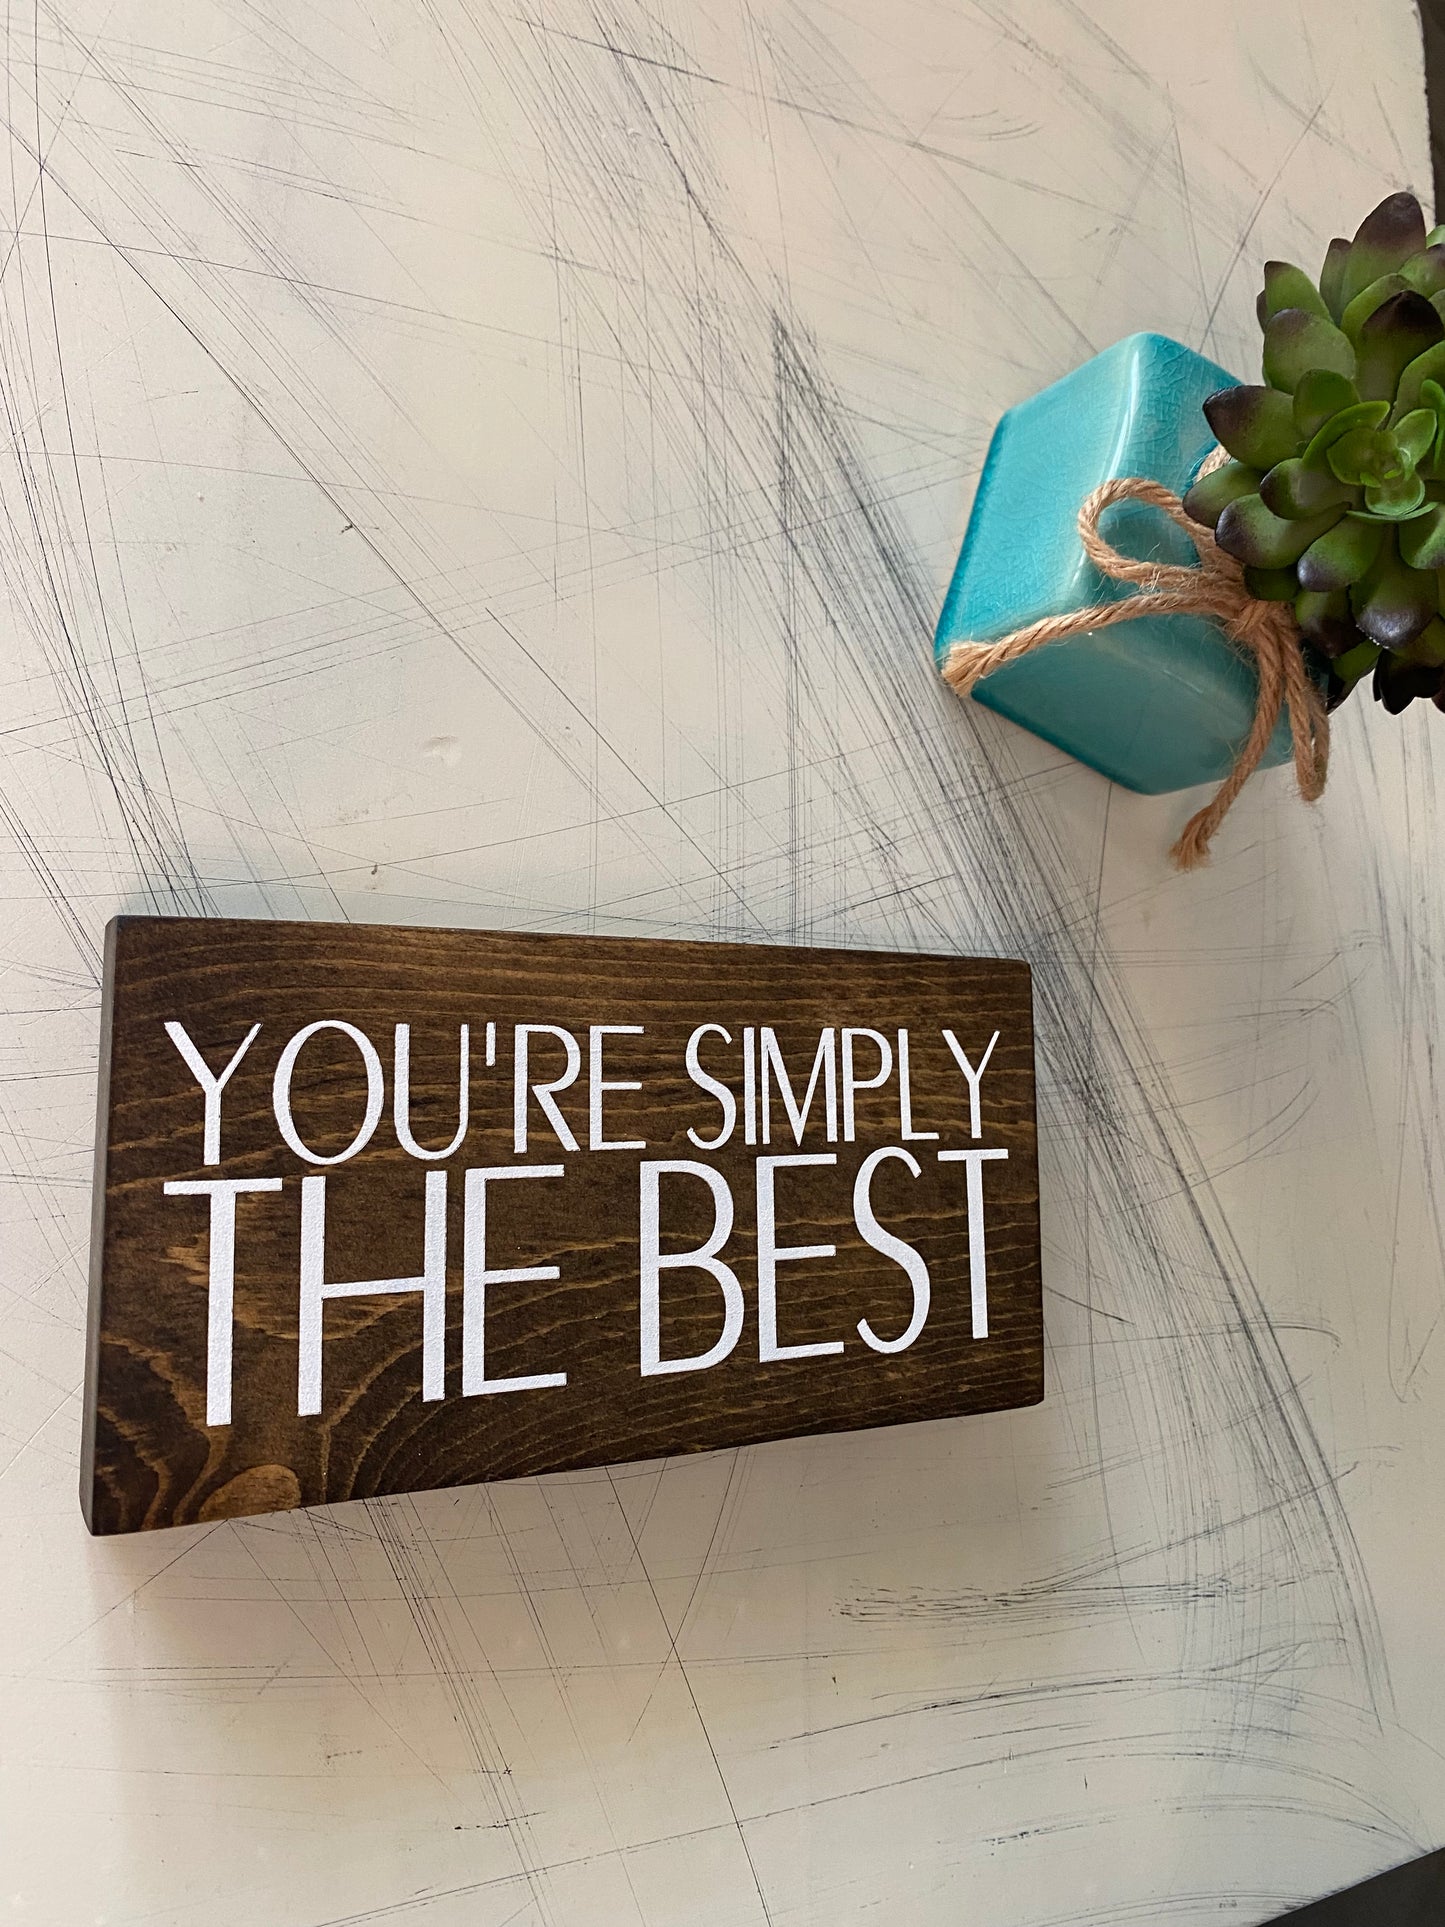 You're simply the best - handmade mini wood sign